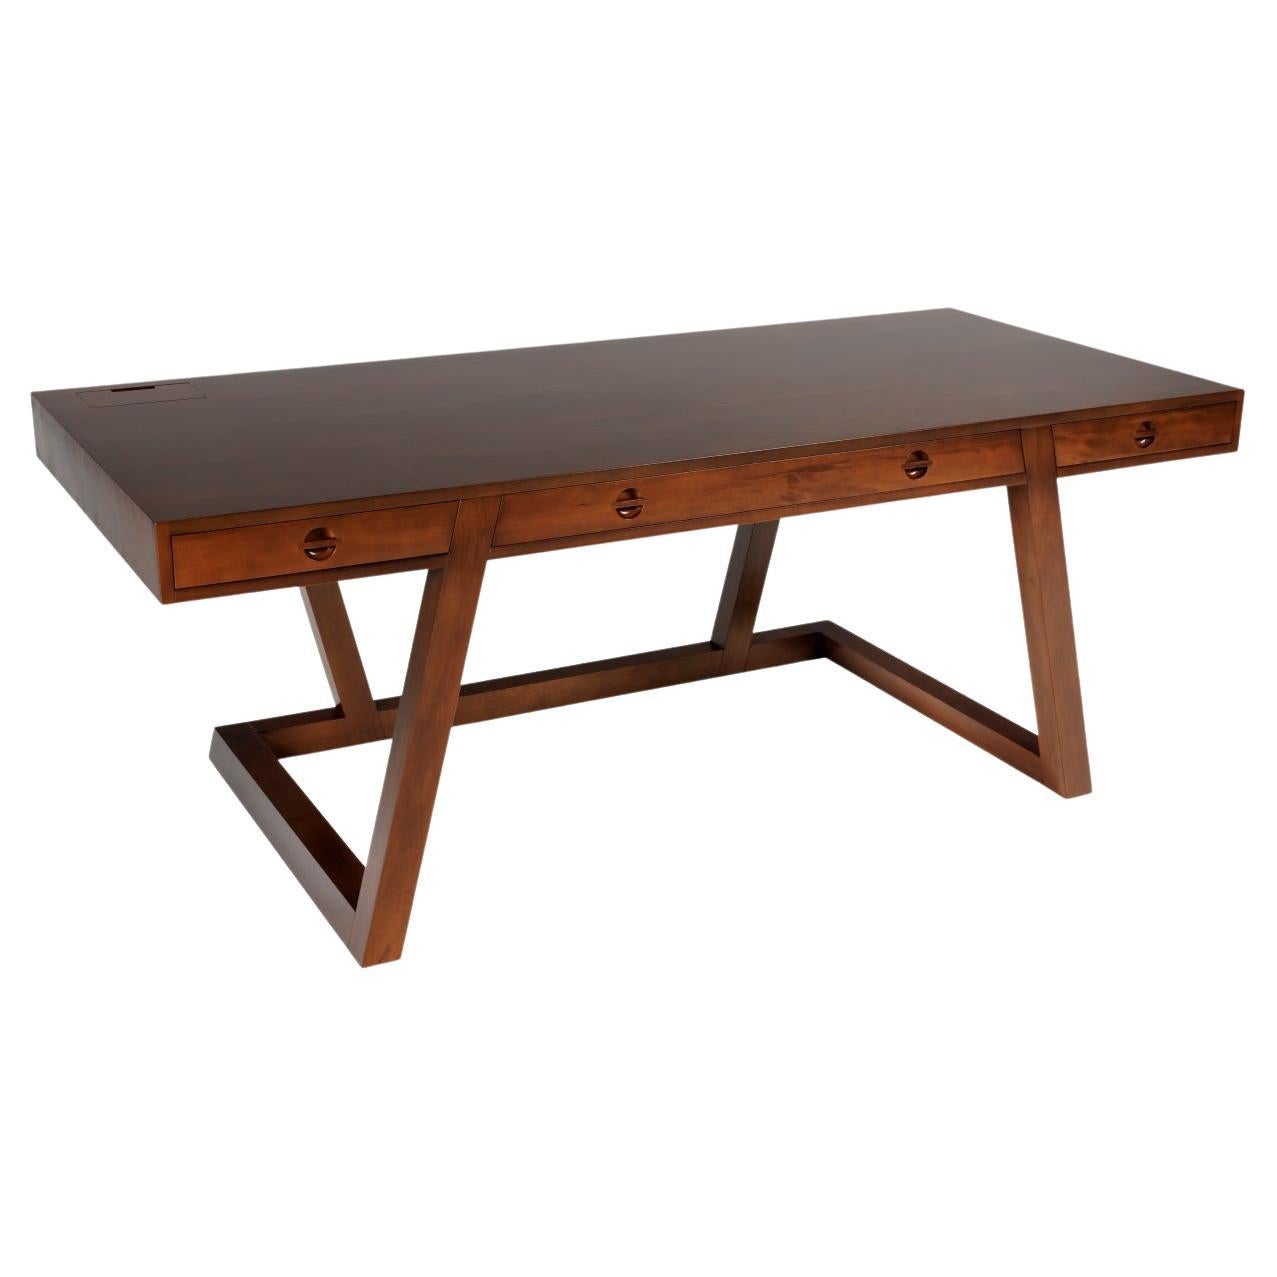 Luxury Mid-Century Modern Style Desk made from Sustainable River Rescued Wood